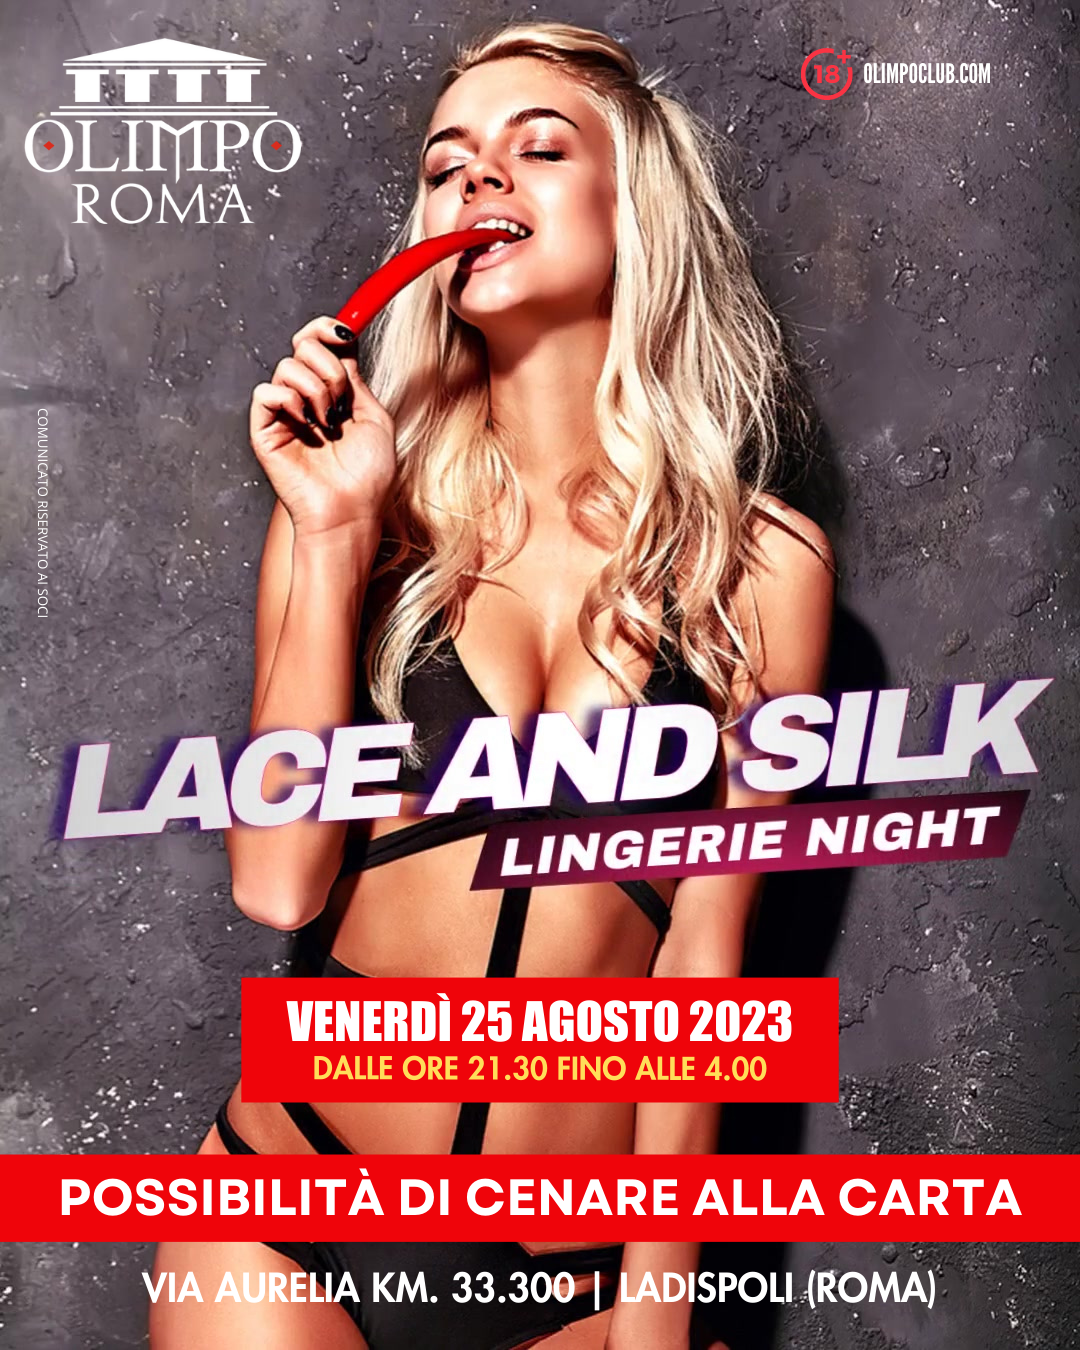 lace and silk lingerie night olimpo club roma